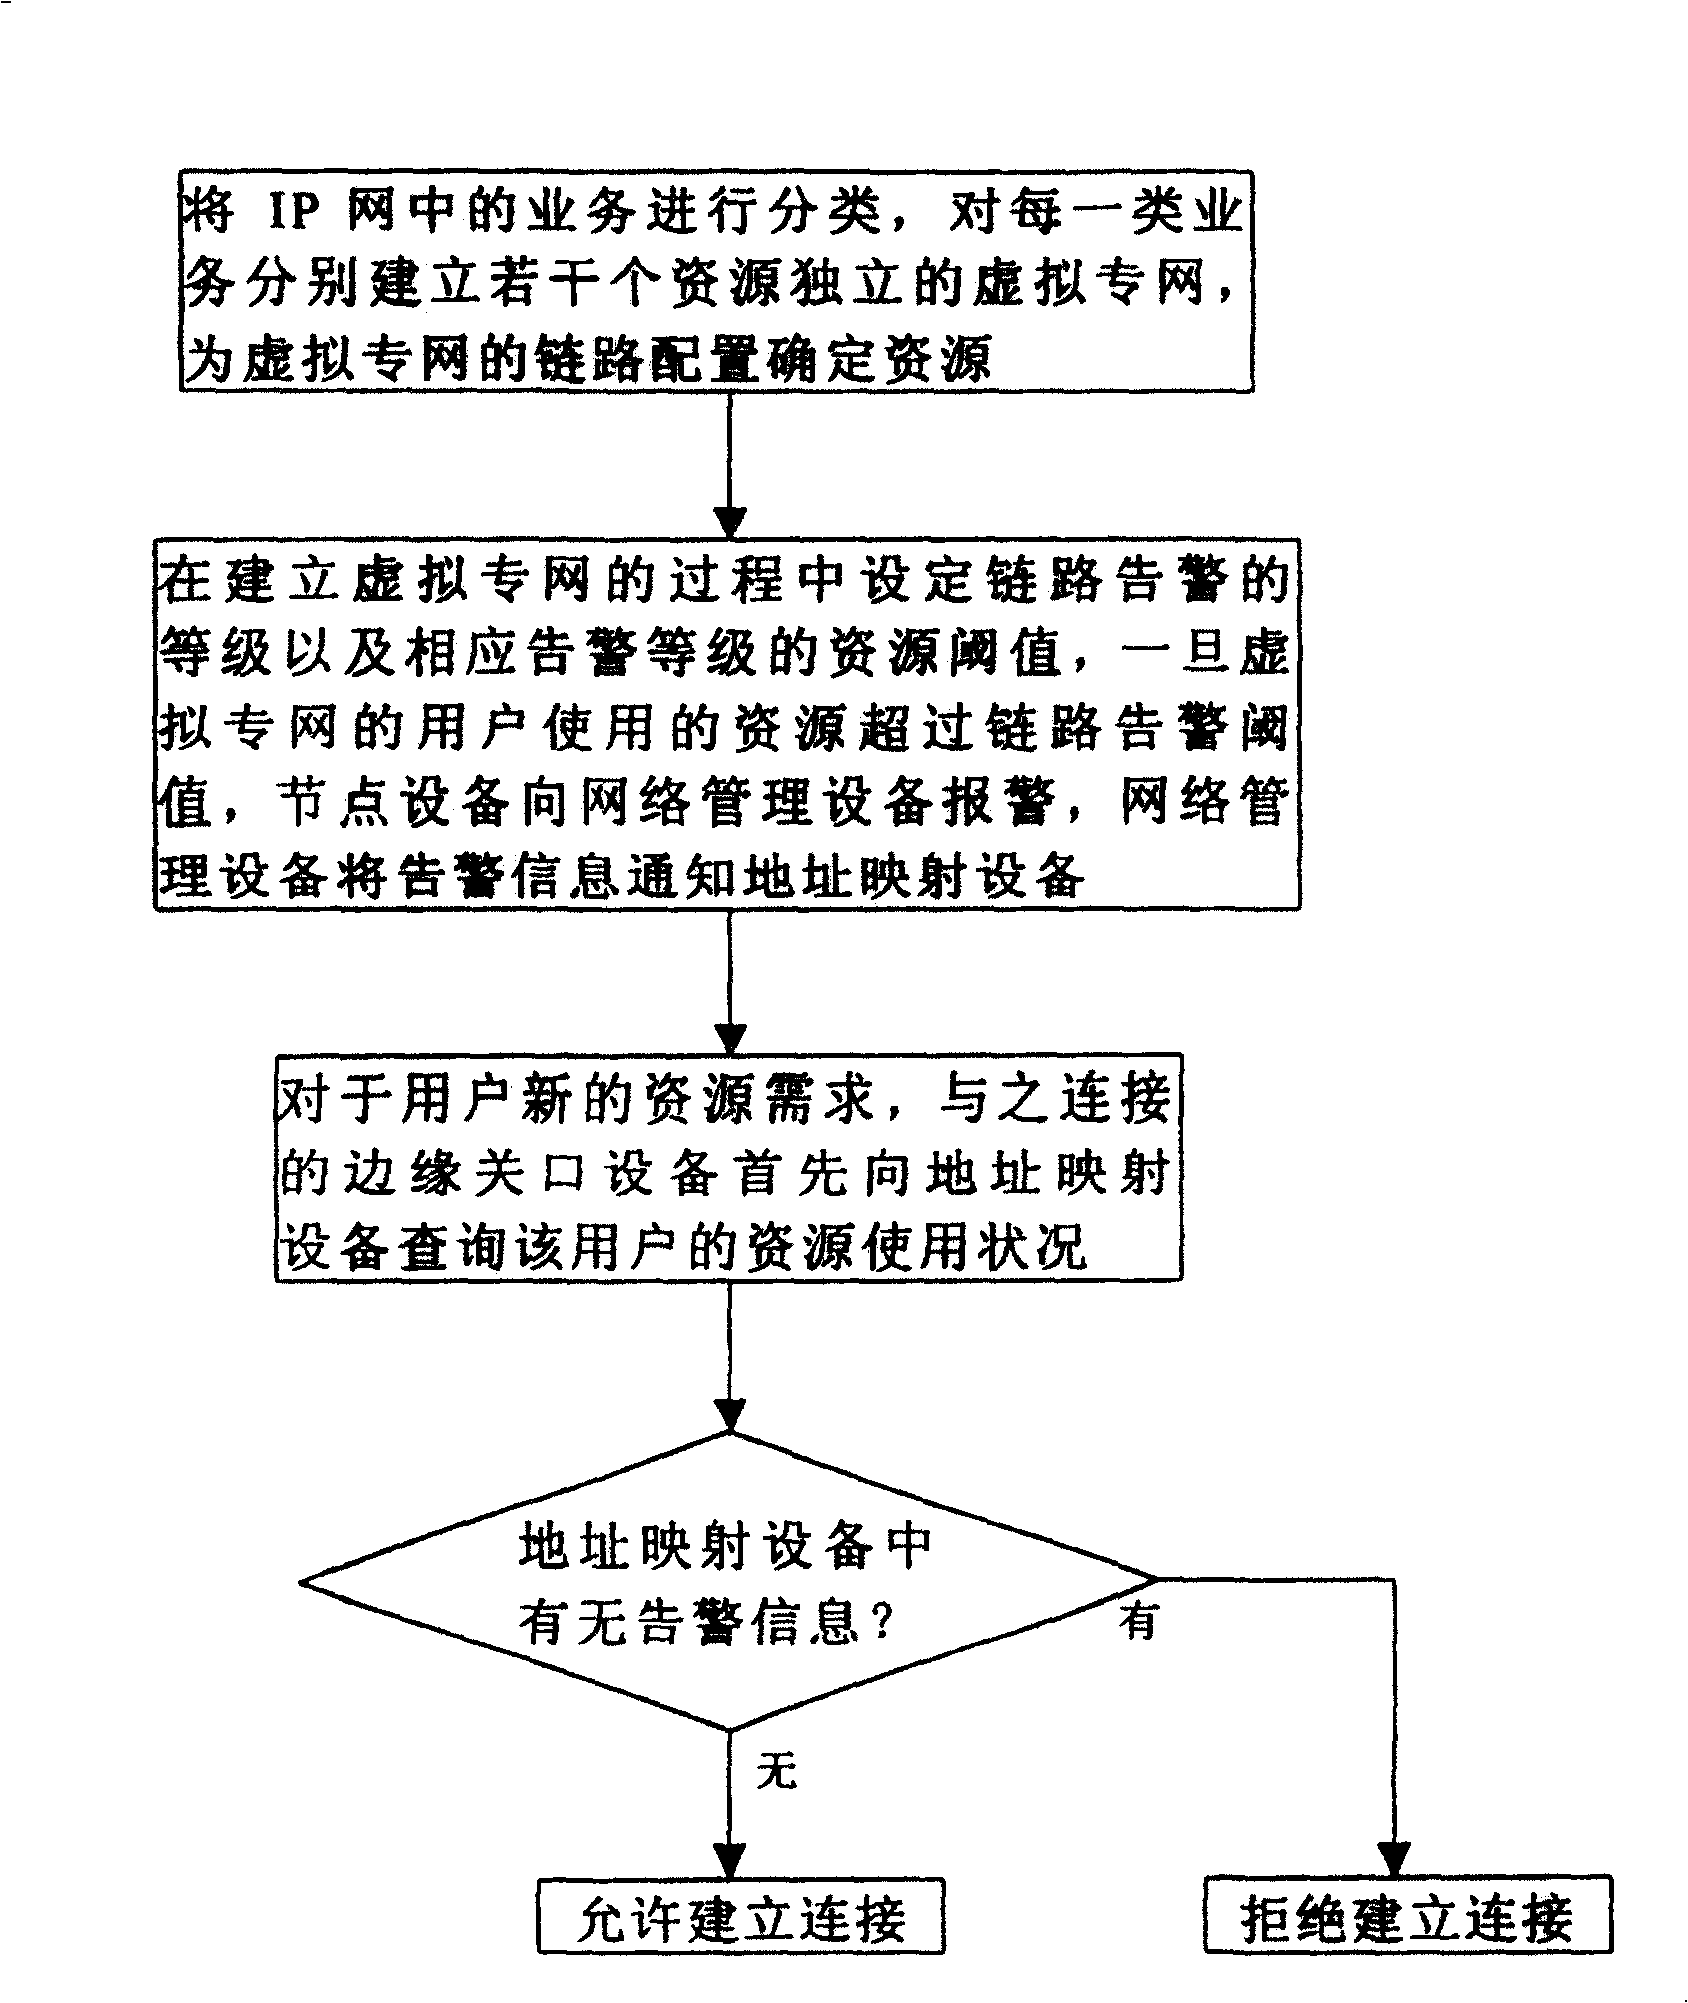 Resource managing method based on chain circuit alarming mechanism in IP telecommunication network system